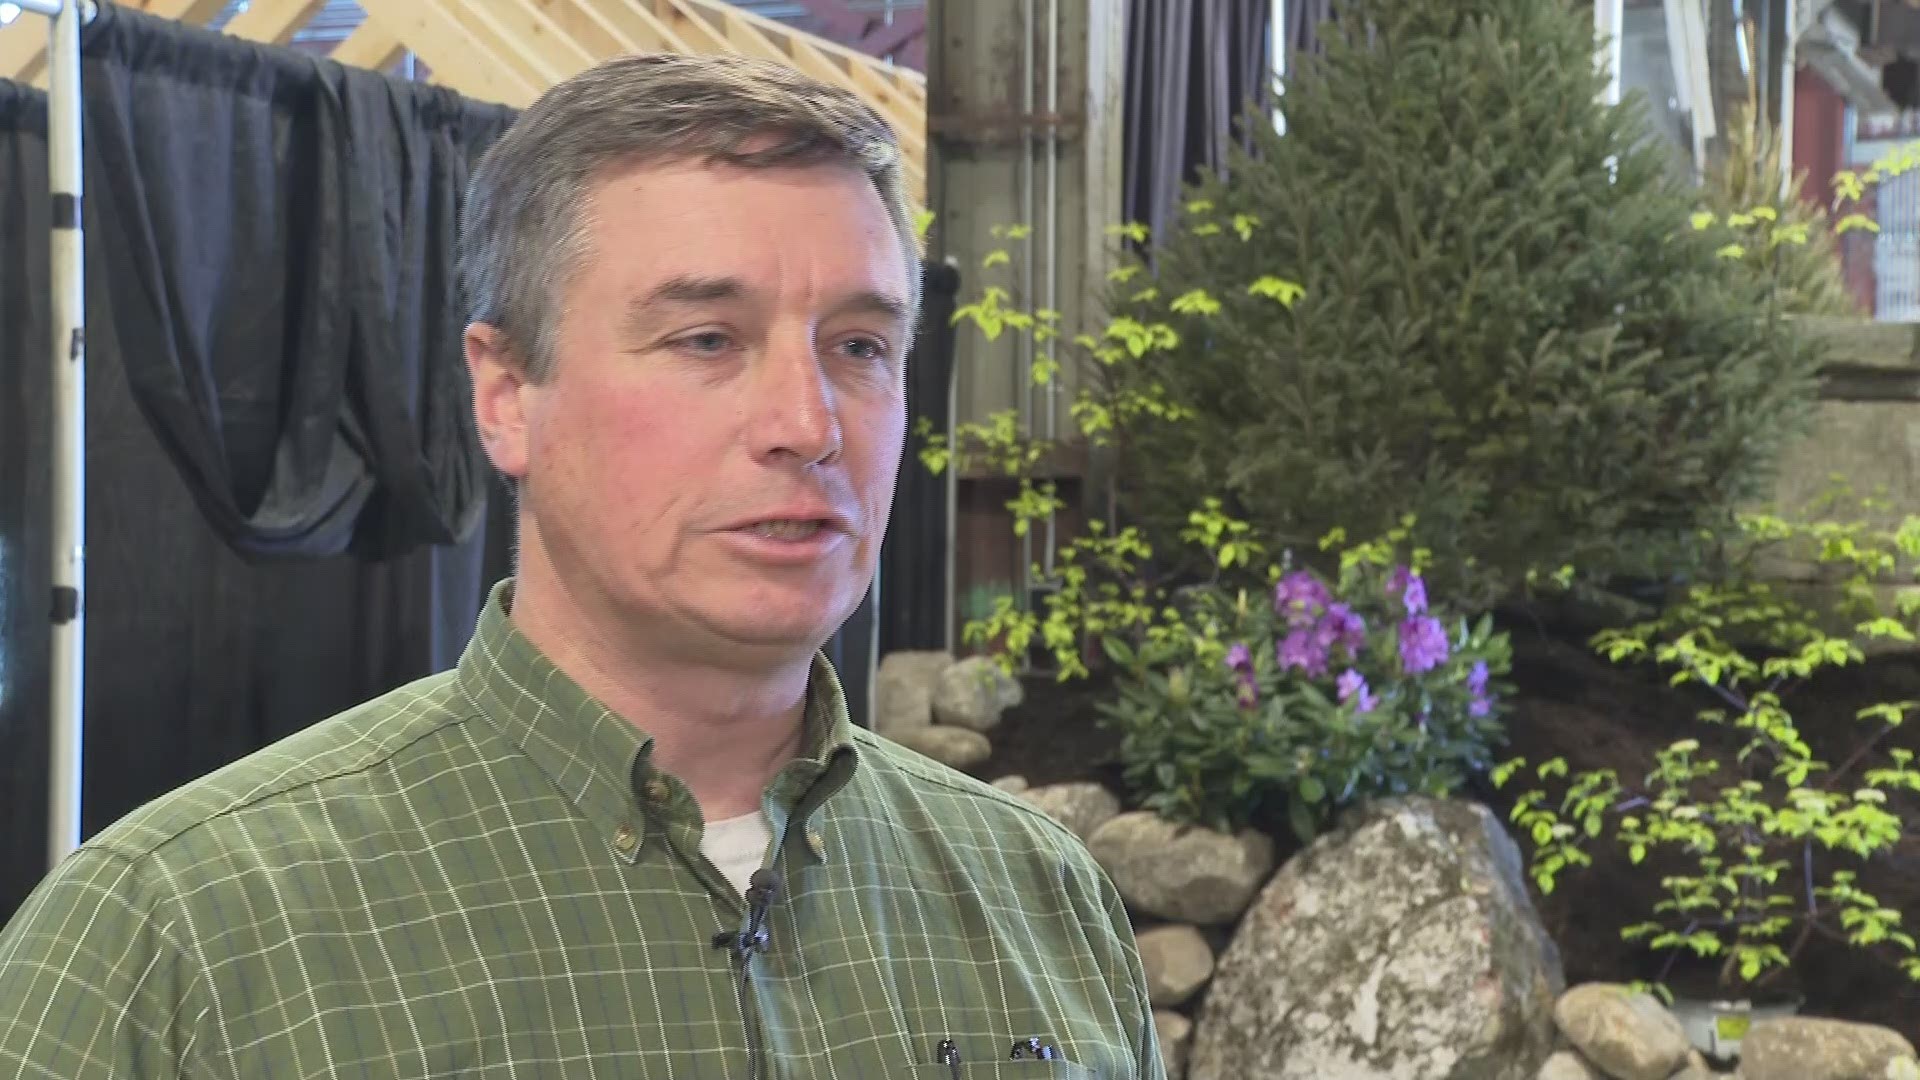 Maine flower show interview with Mark Faunce, Chair for the Maine Flower Show